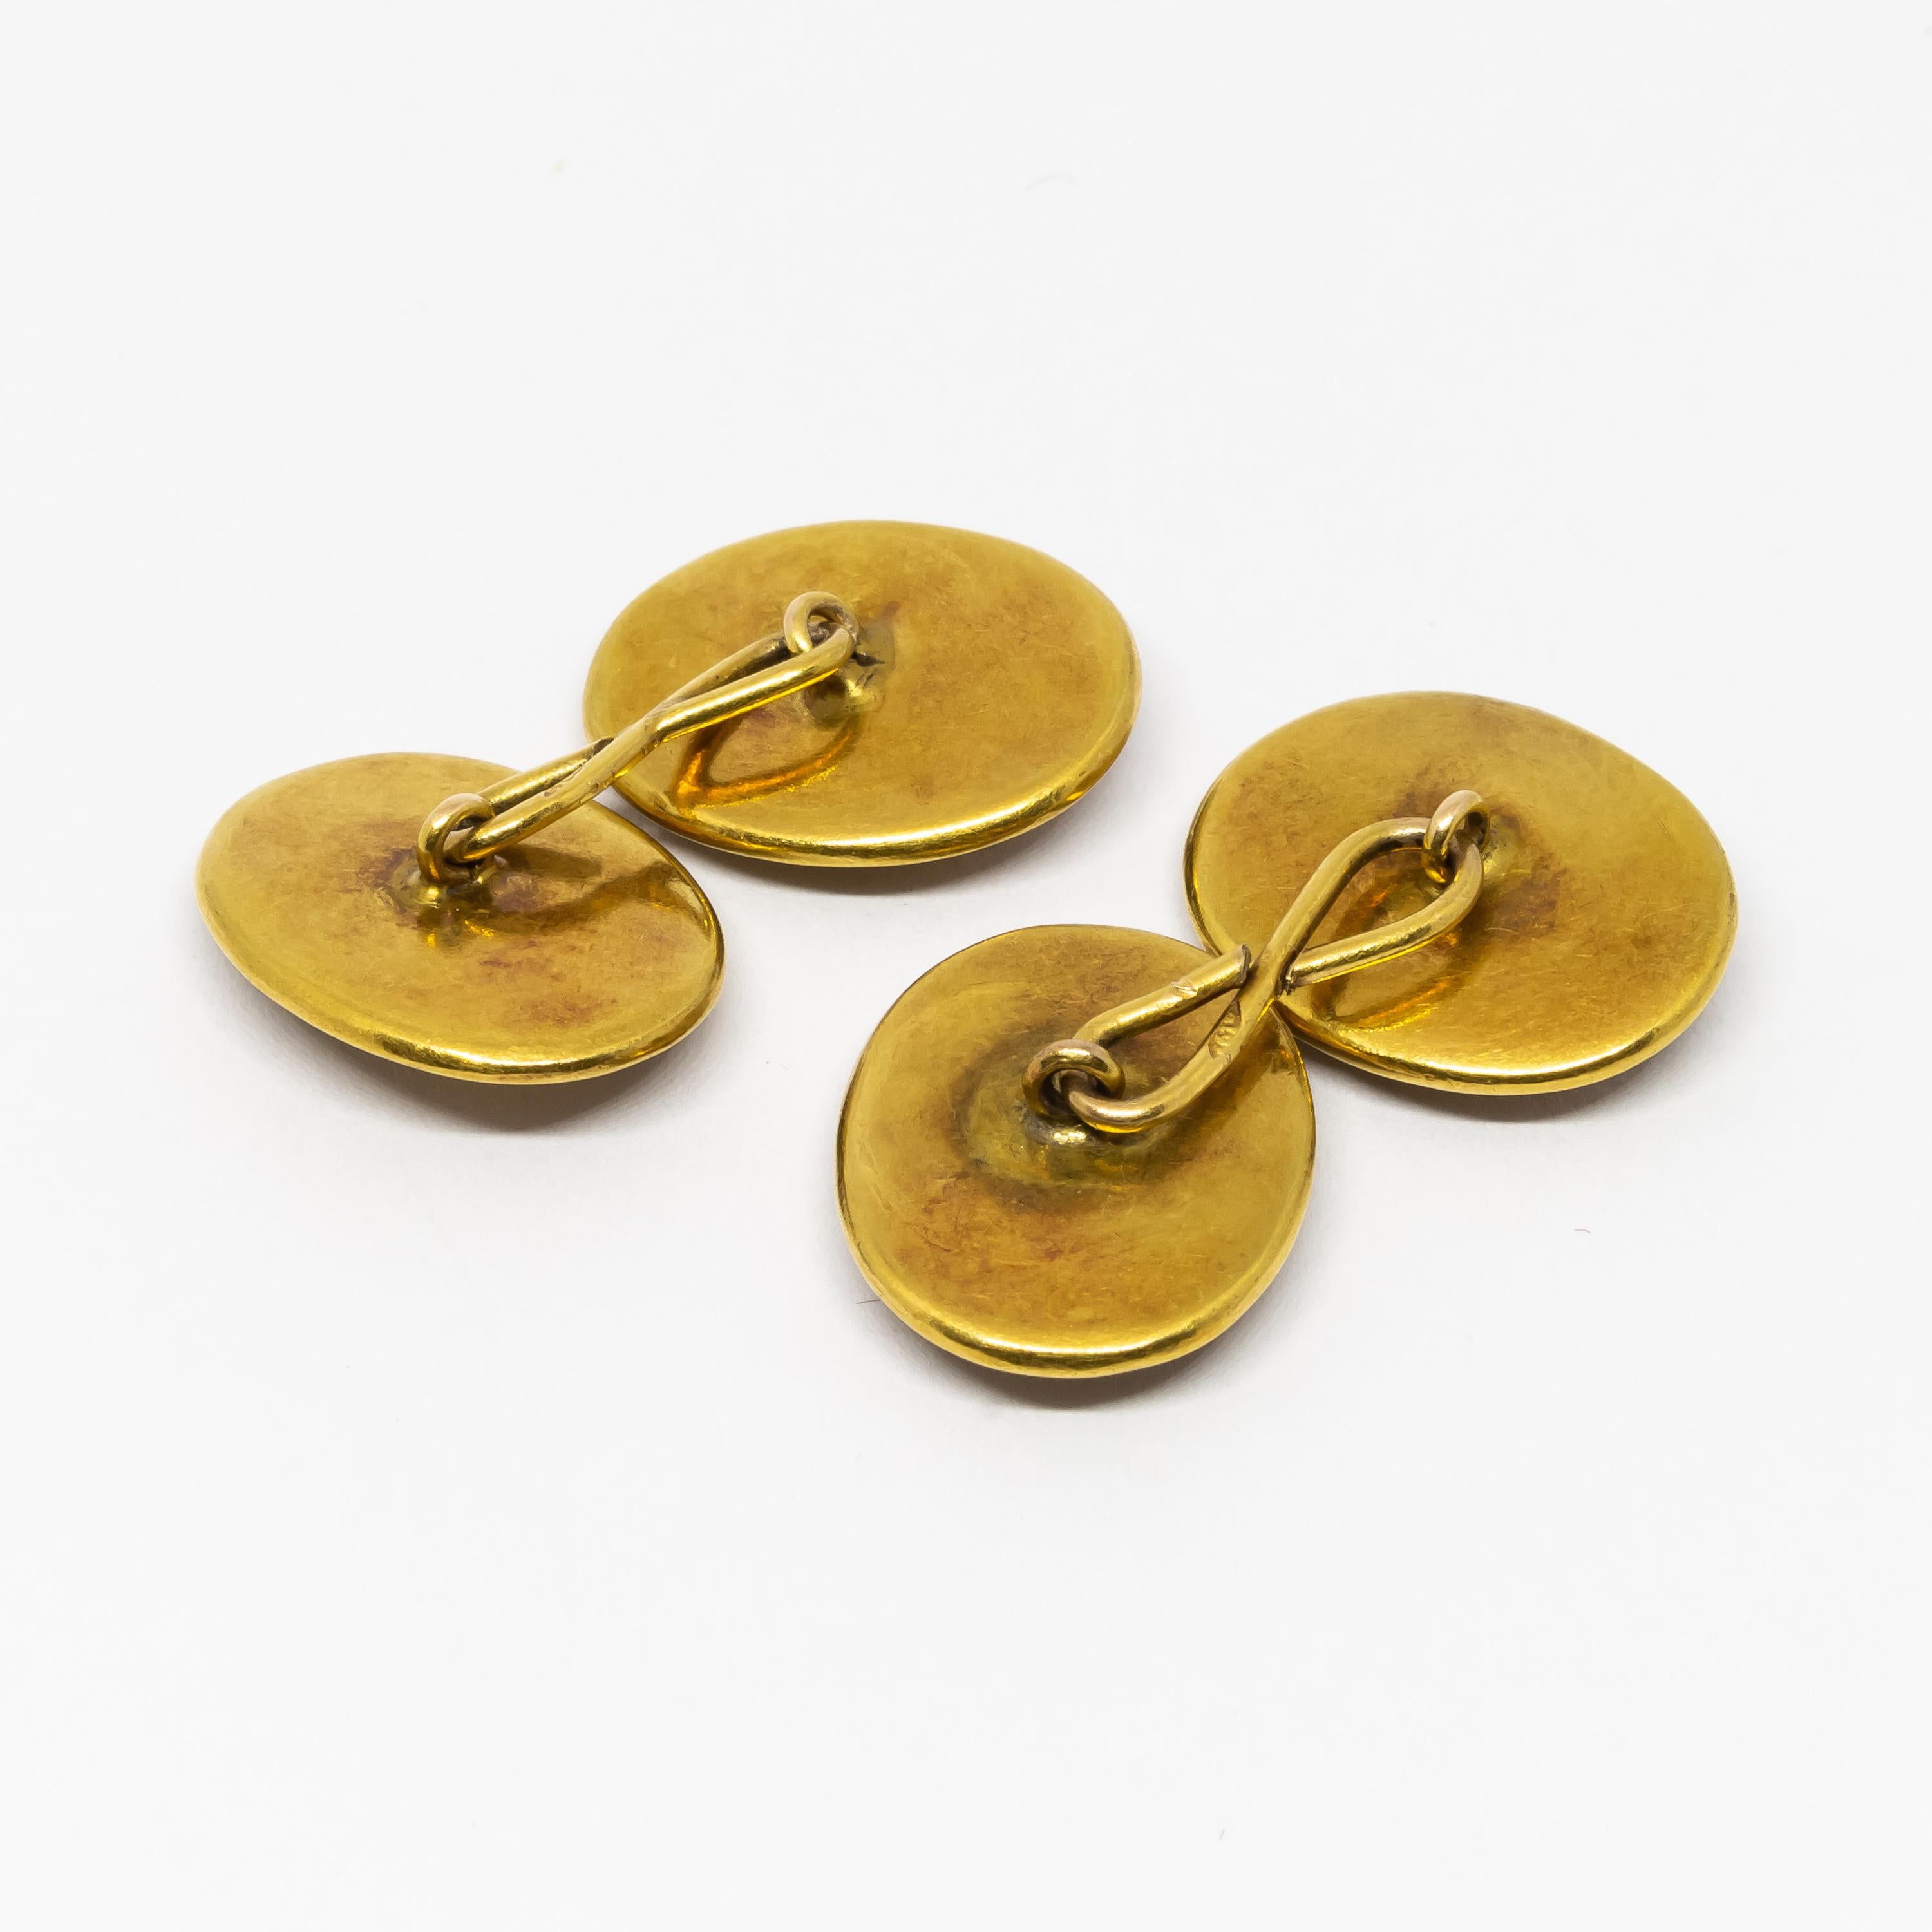 Antique Gold Frog Cufflinks, circa 1900 In Good Condition For Sale In London, GB